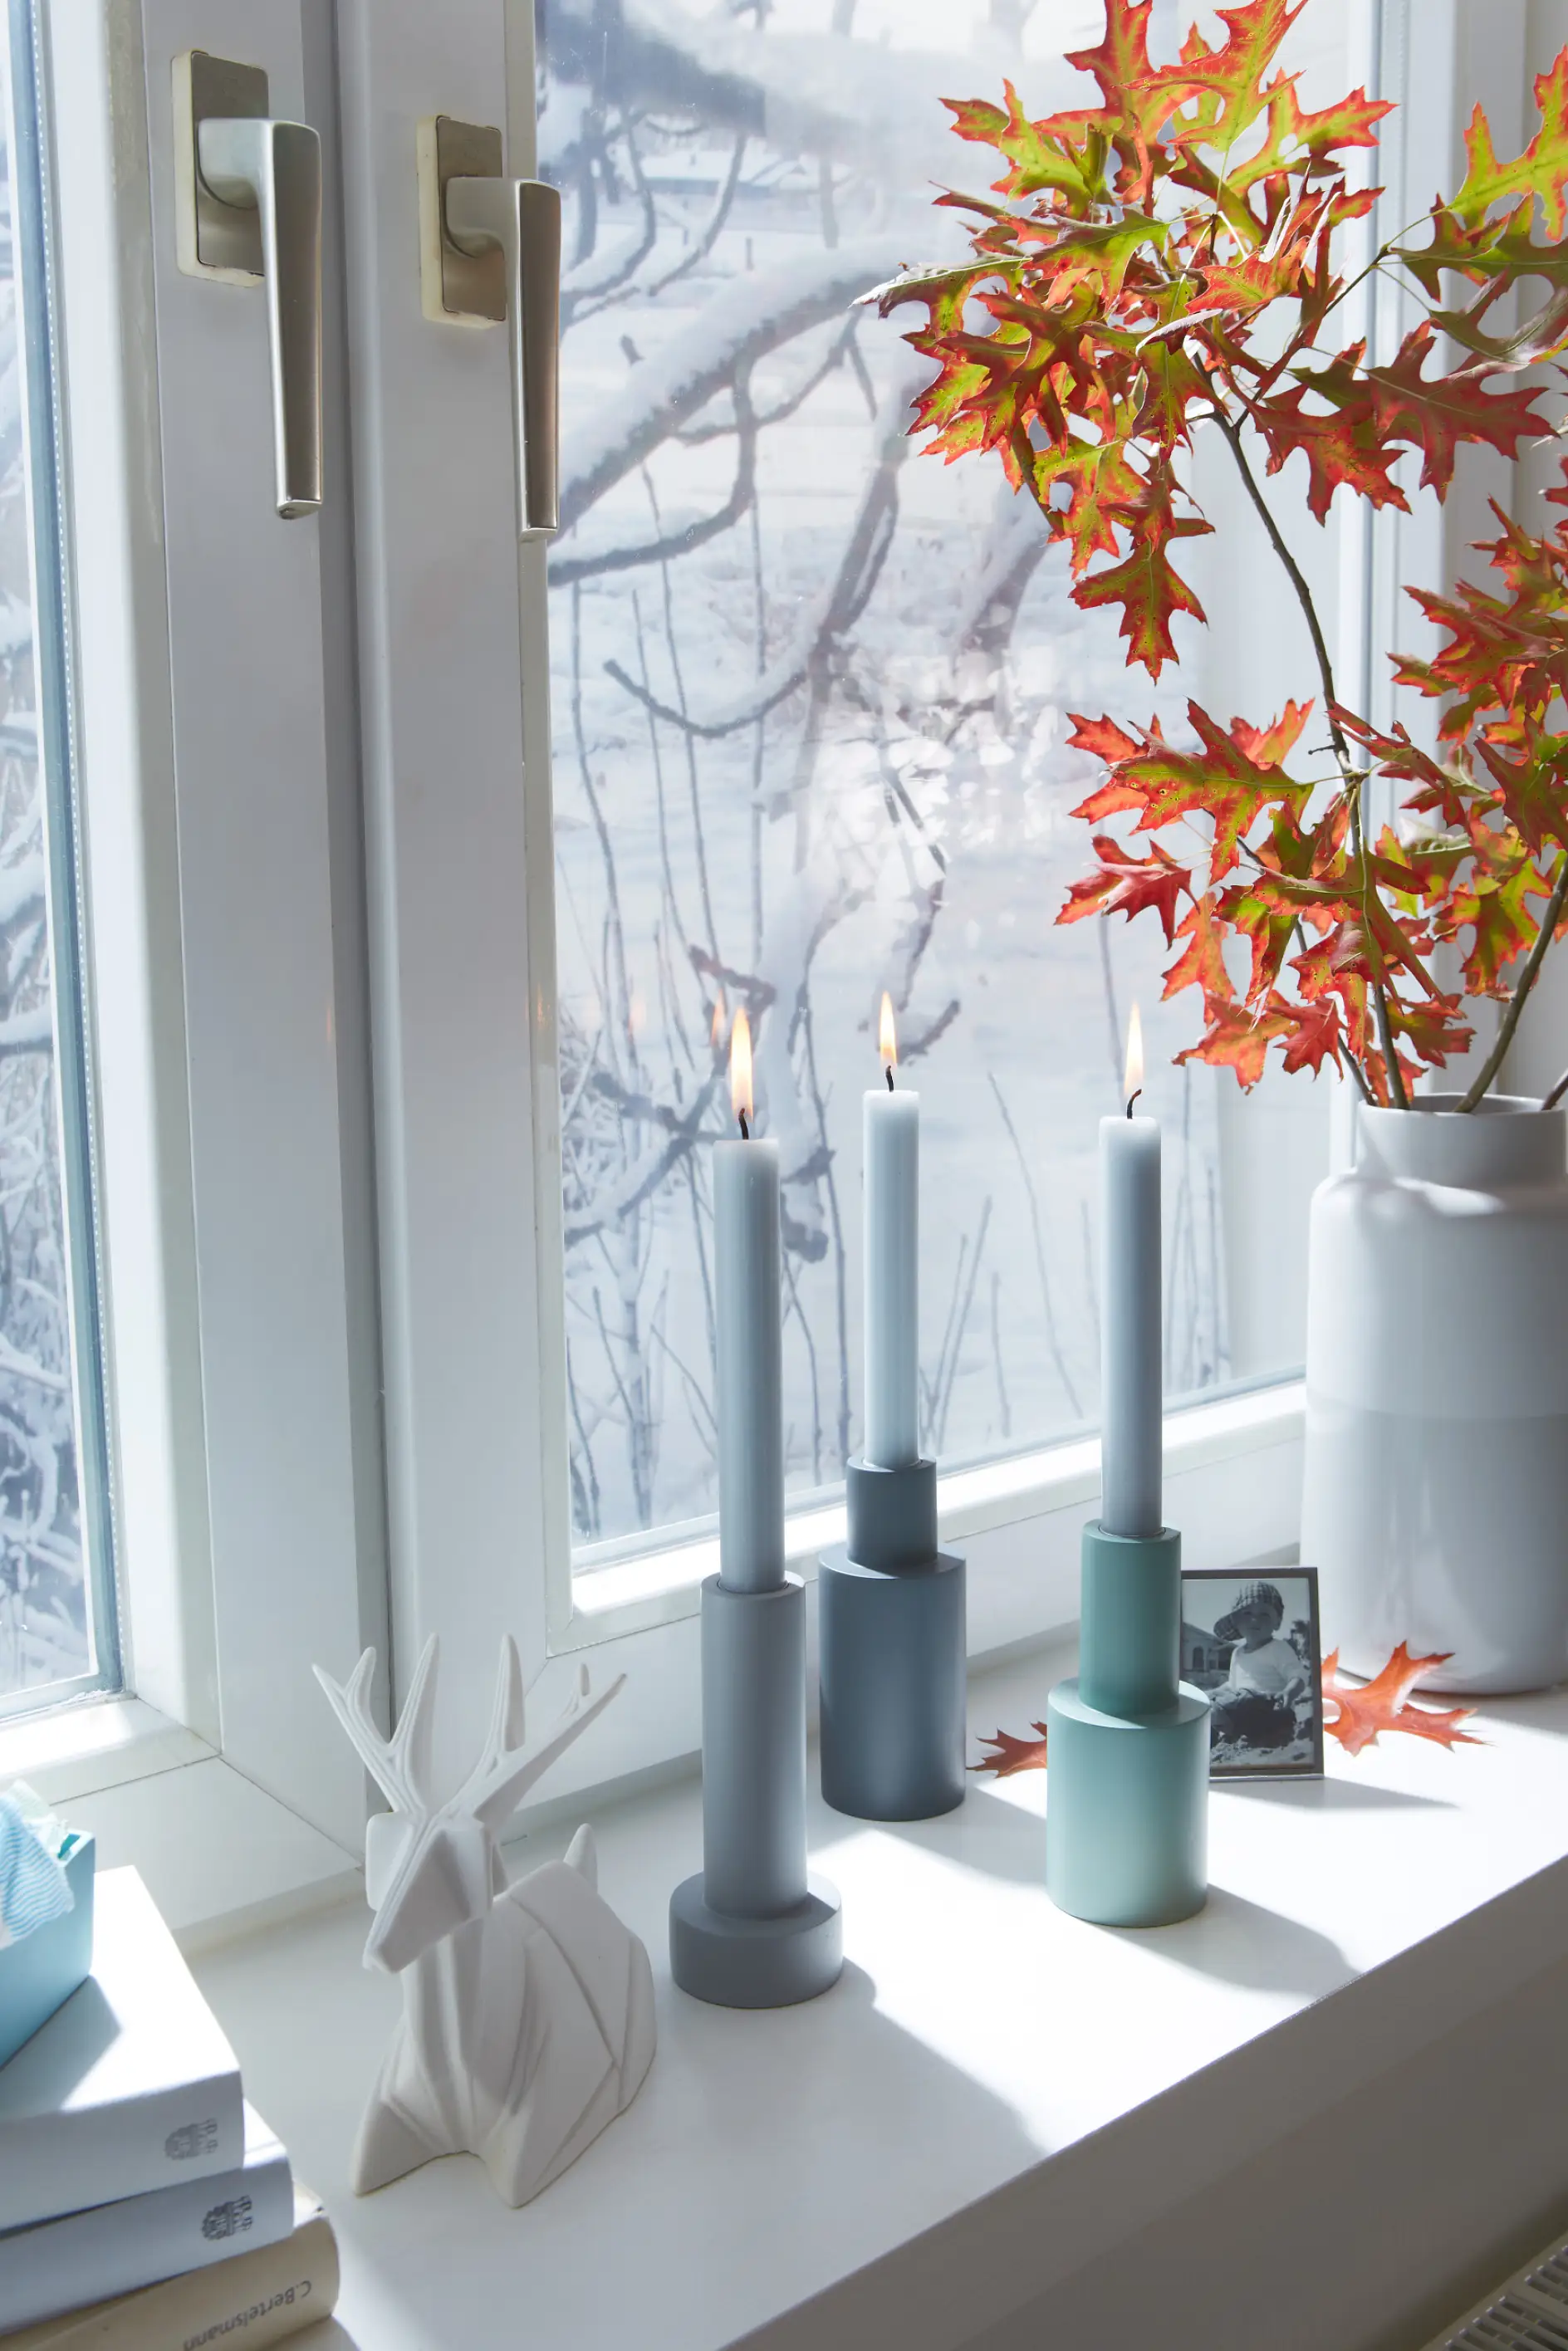 Candles in front of an insulated window in winter